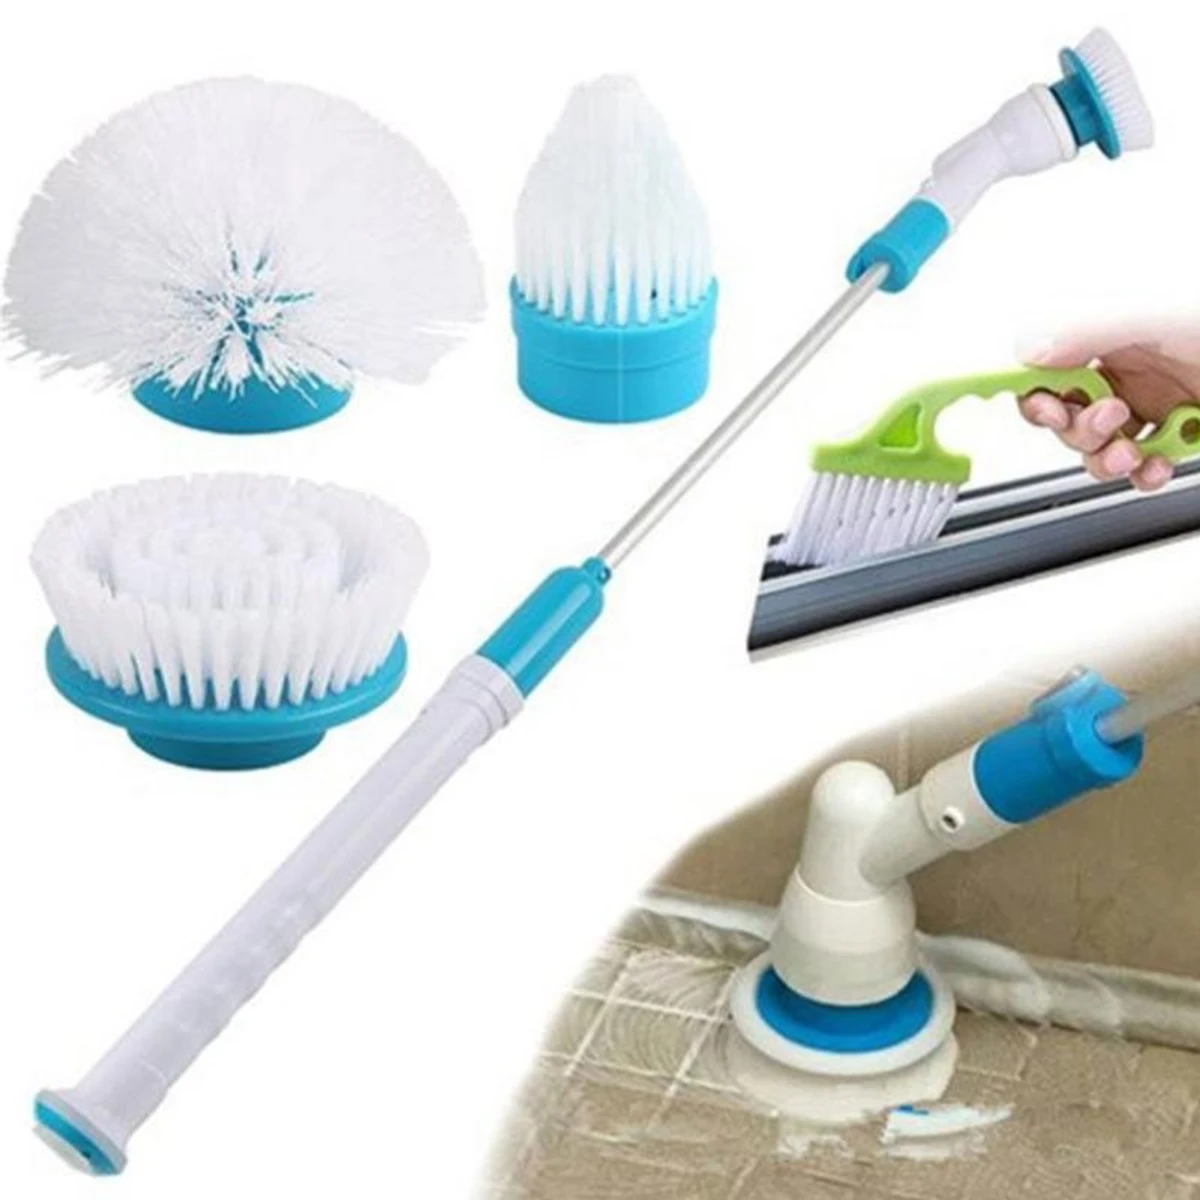 Rechargeable Home Cleaner Spin Mop